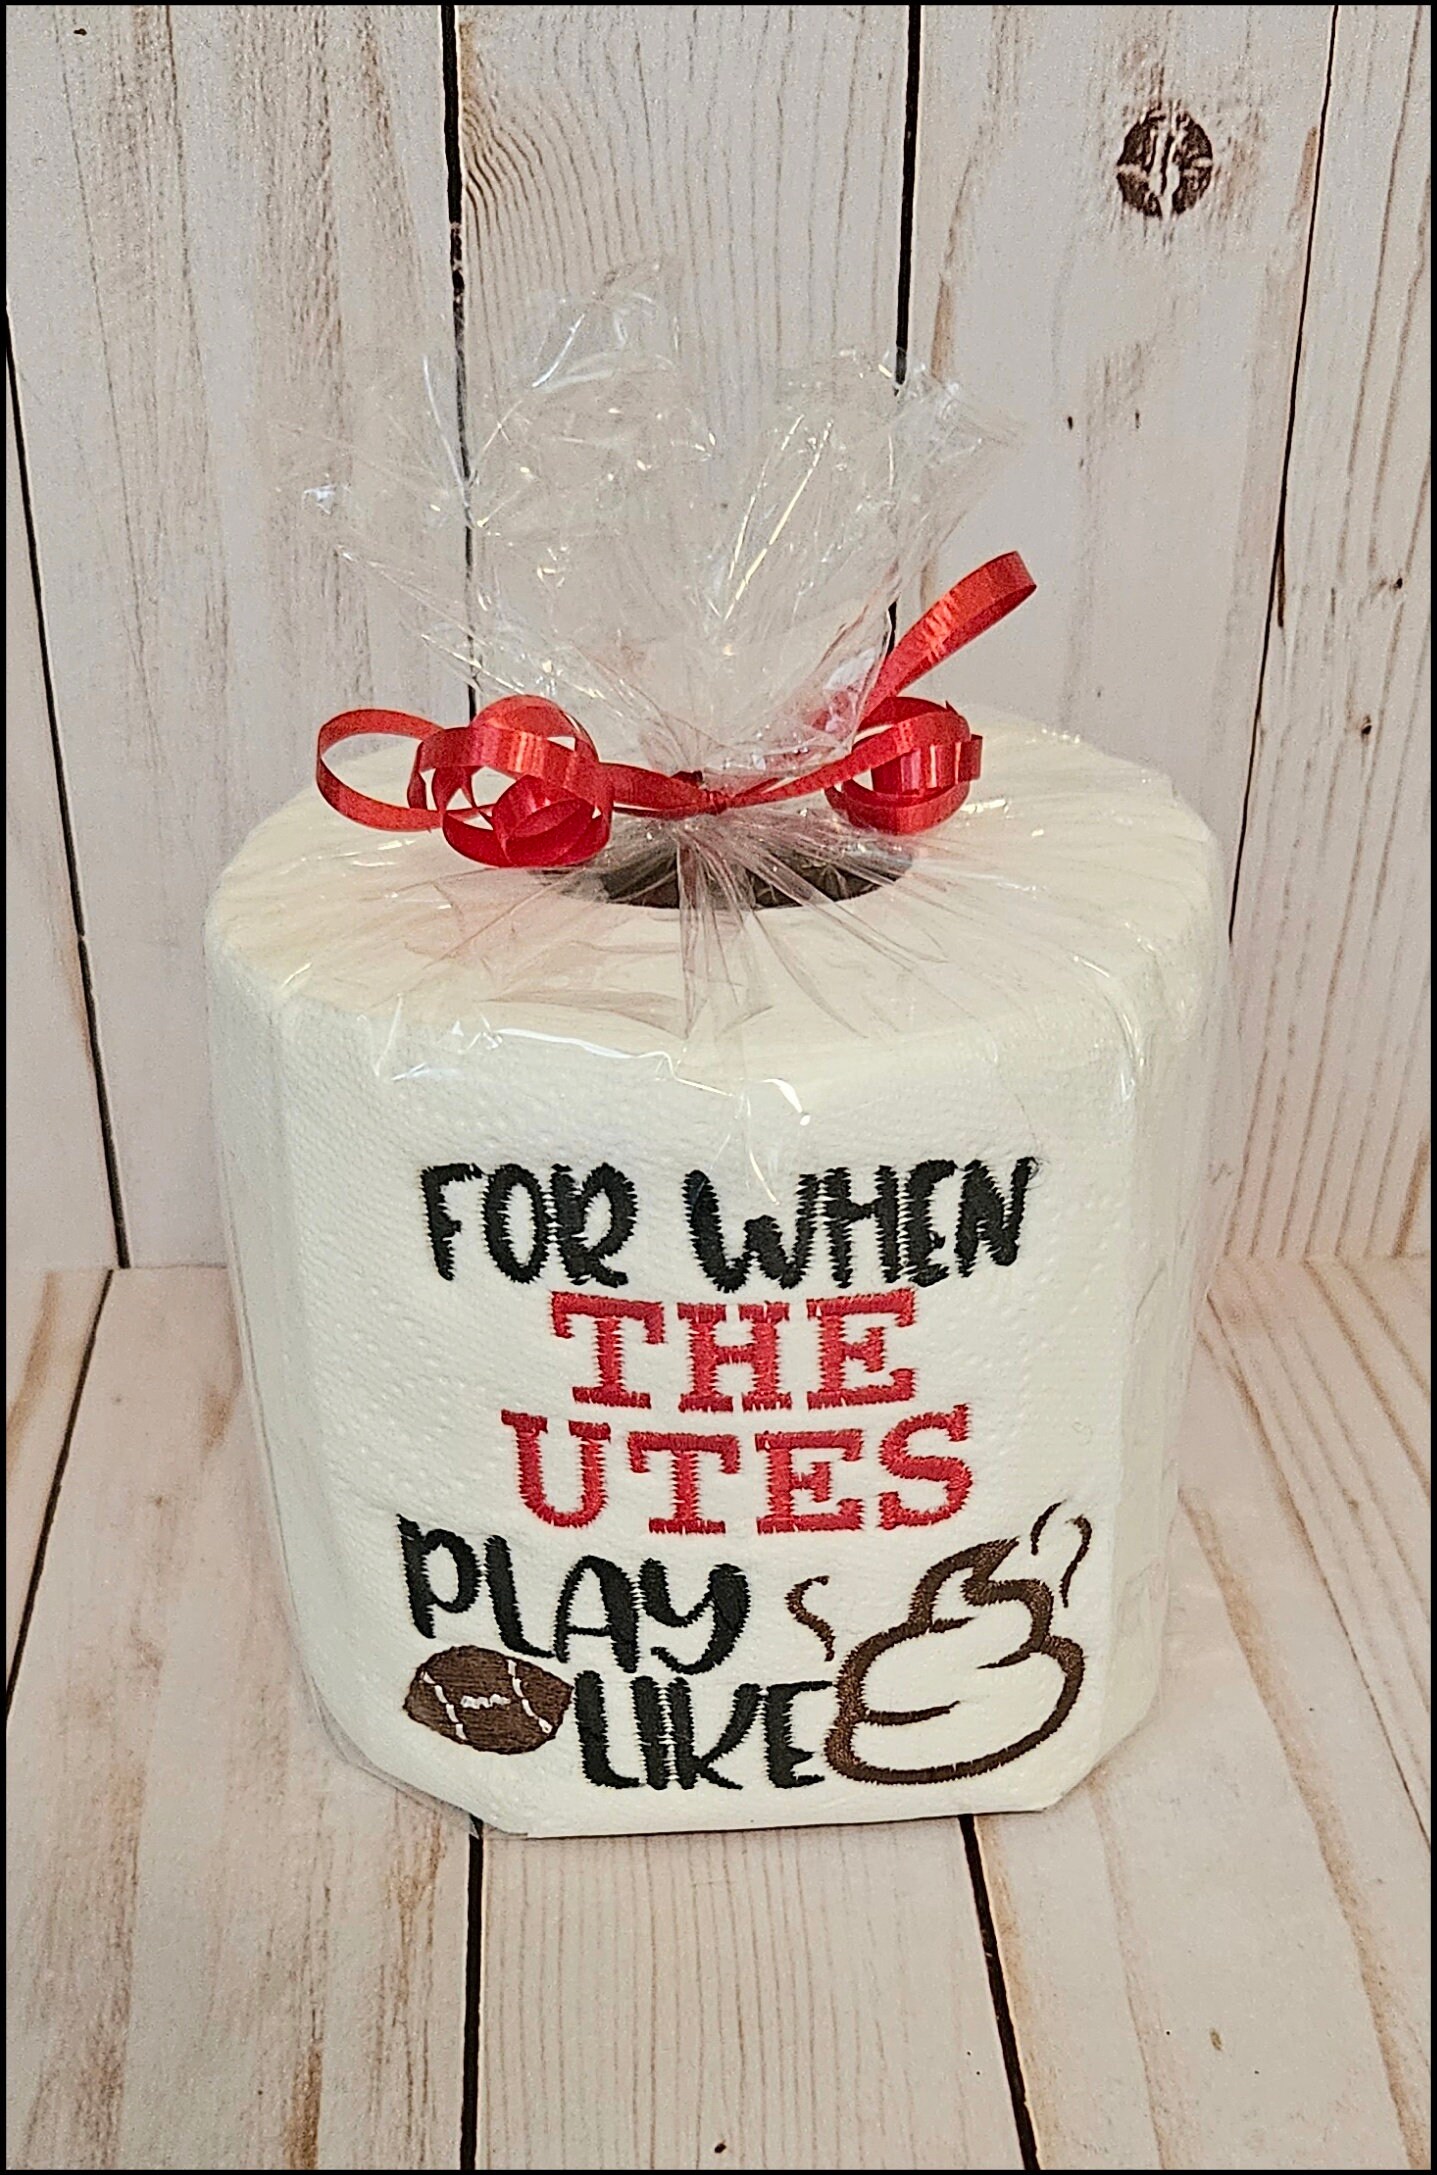 The Buckeyes, Toilet Paper Gag Gift, Novelty TP, Play Like Crap